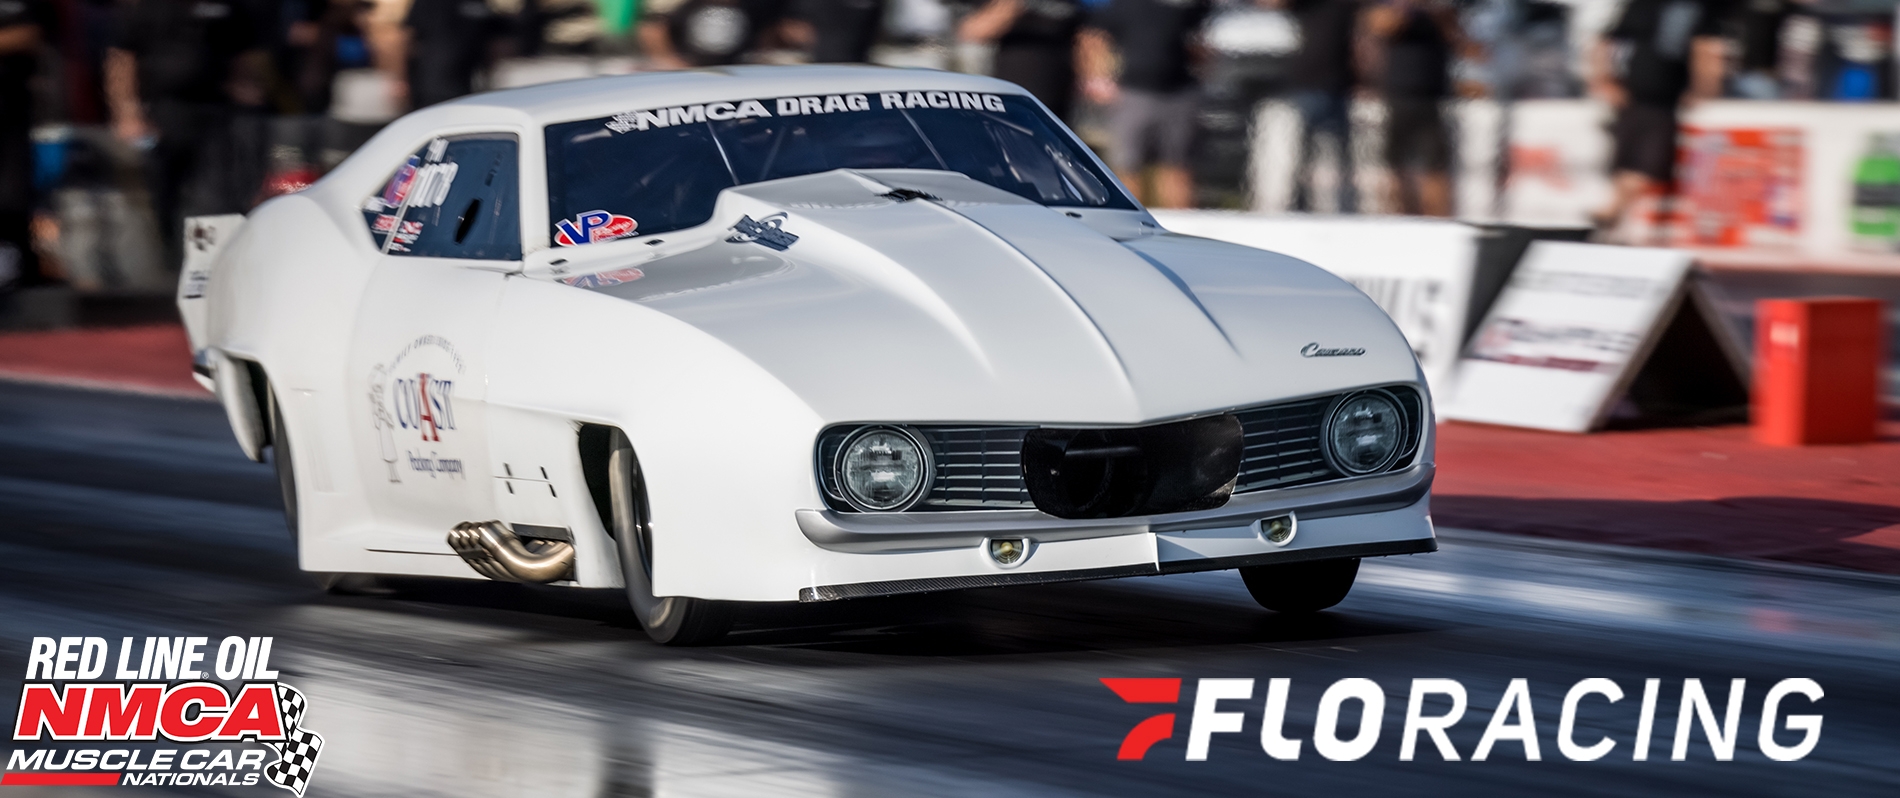 FloRacing Continues Live Stream of NMCA Muscle Car Nationals